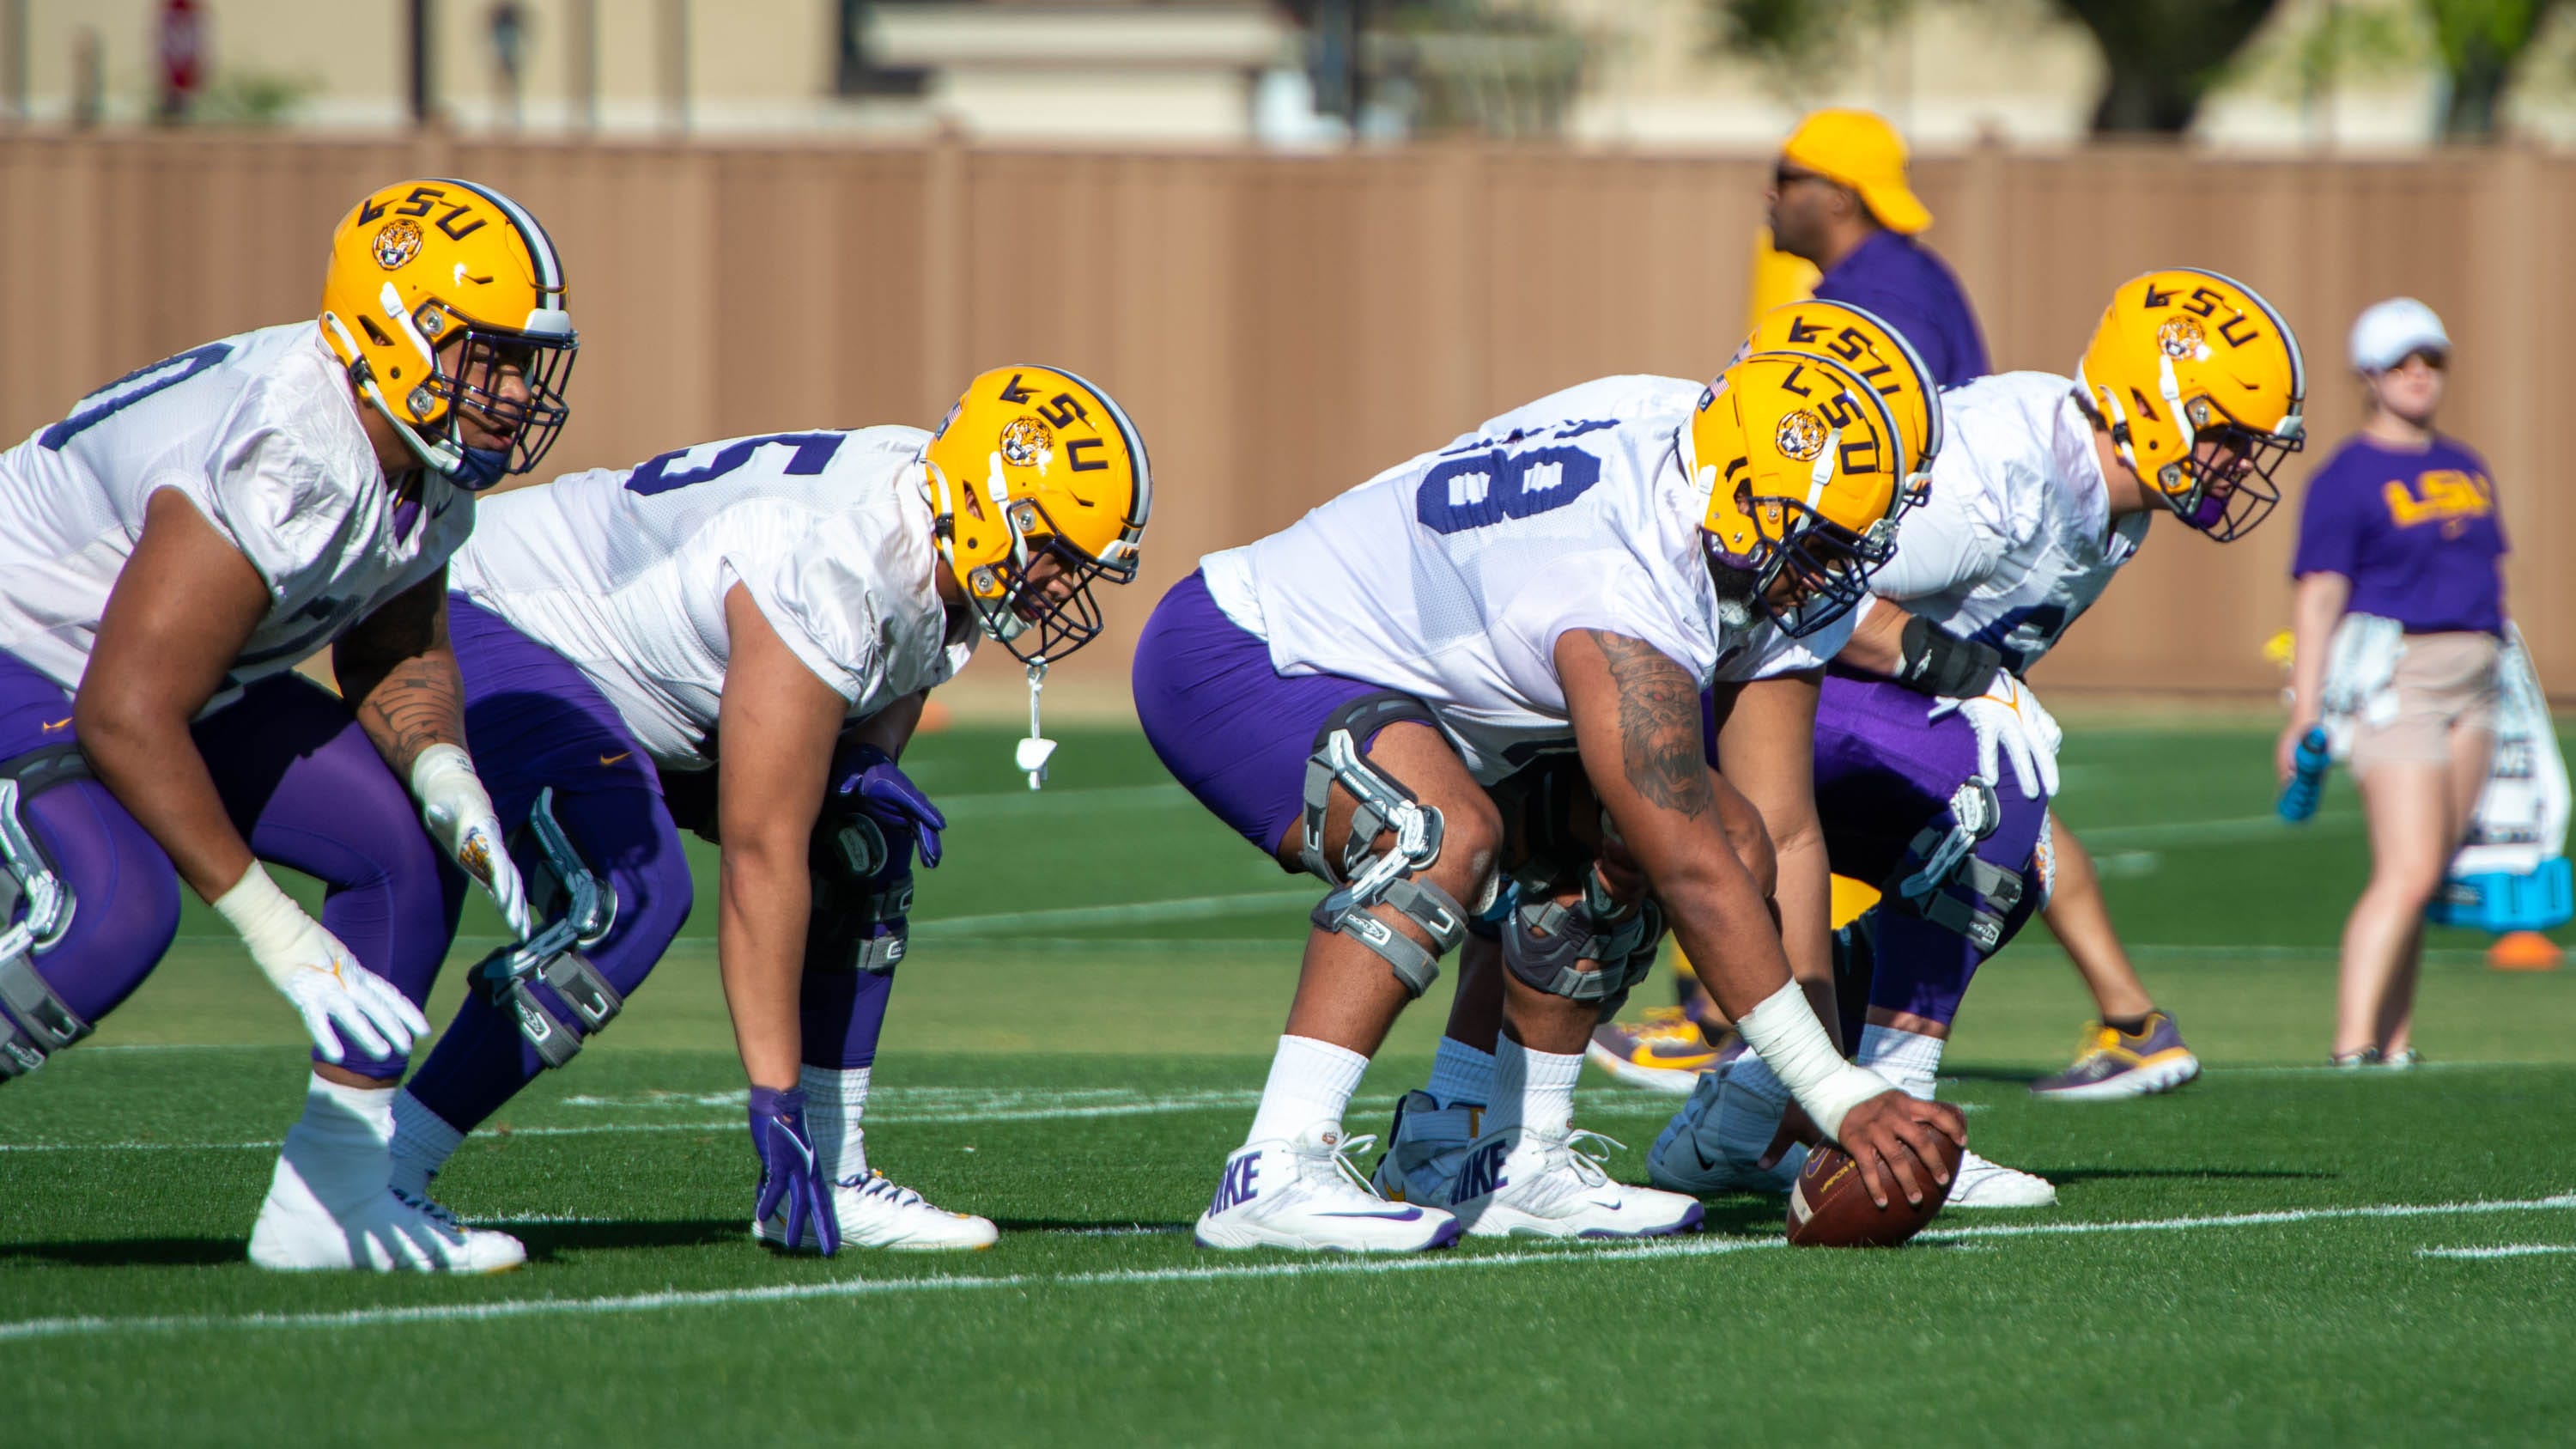 LSU OL Garrett Dellinger Out With Hand Injury, Another New Rotation in Works